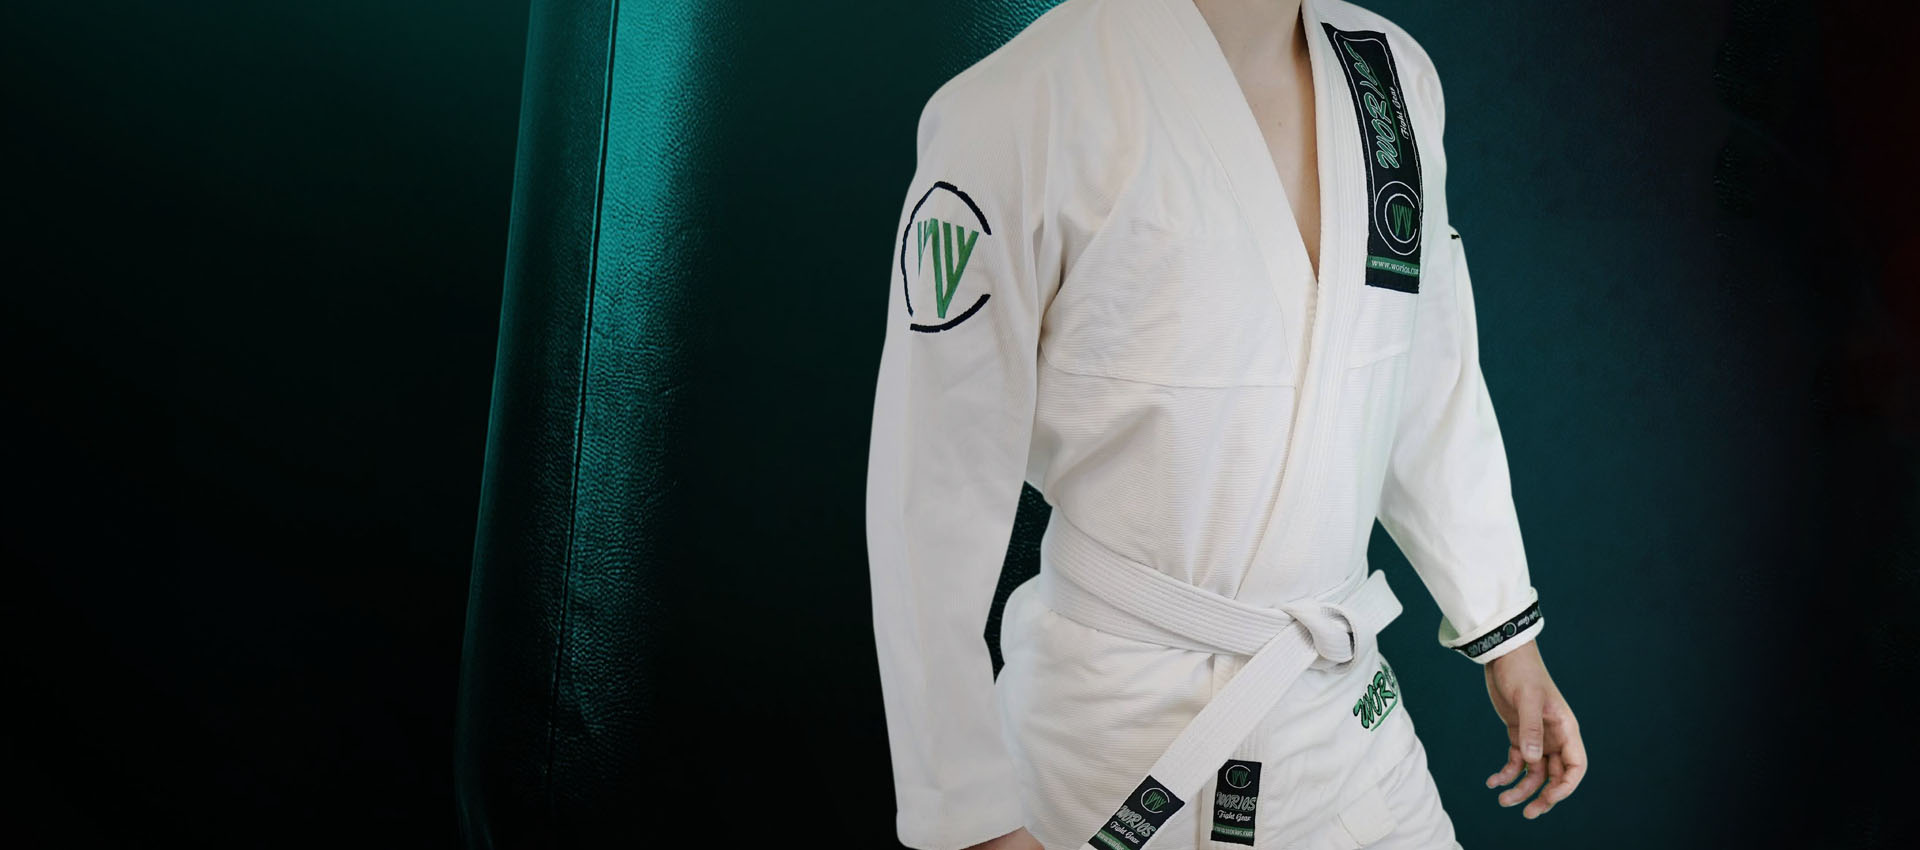 New Special GI For Fighter